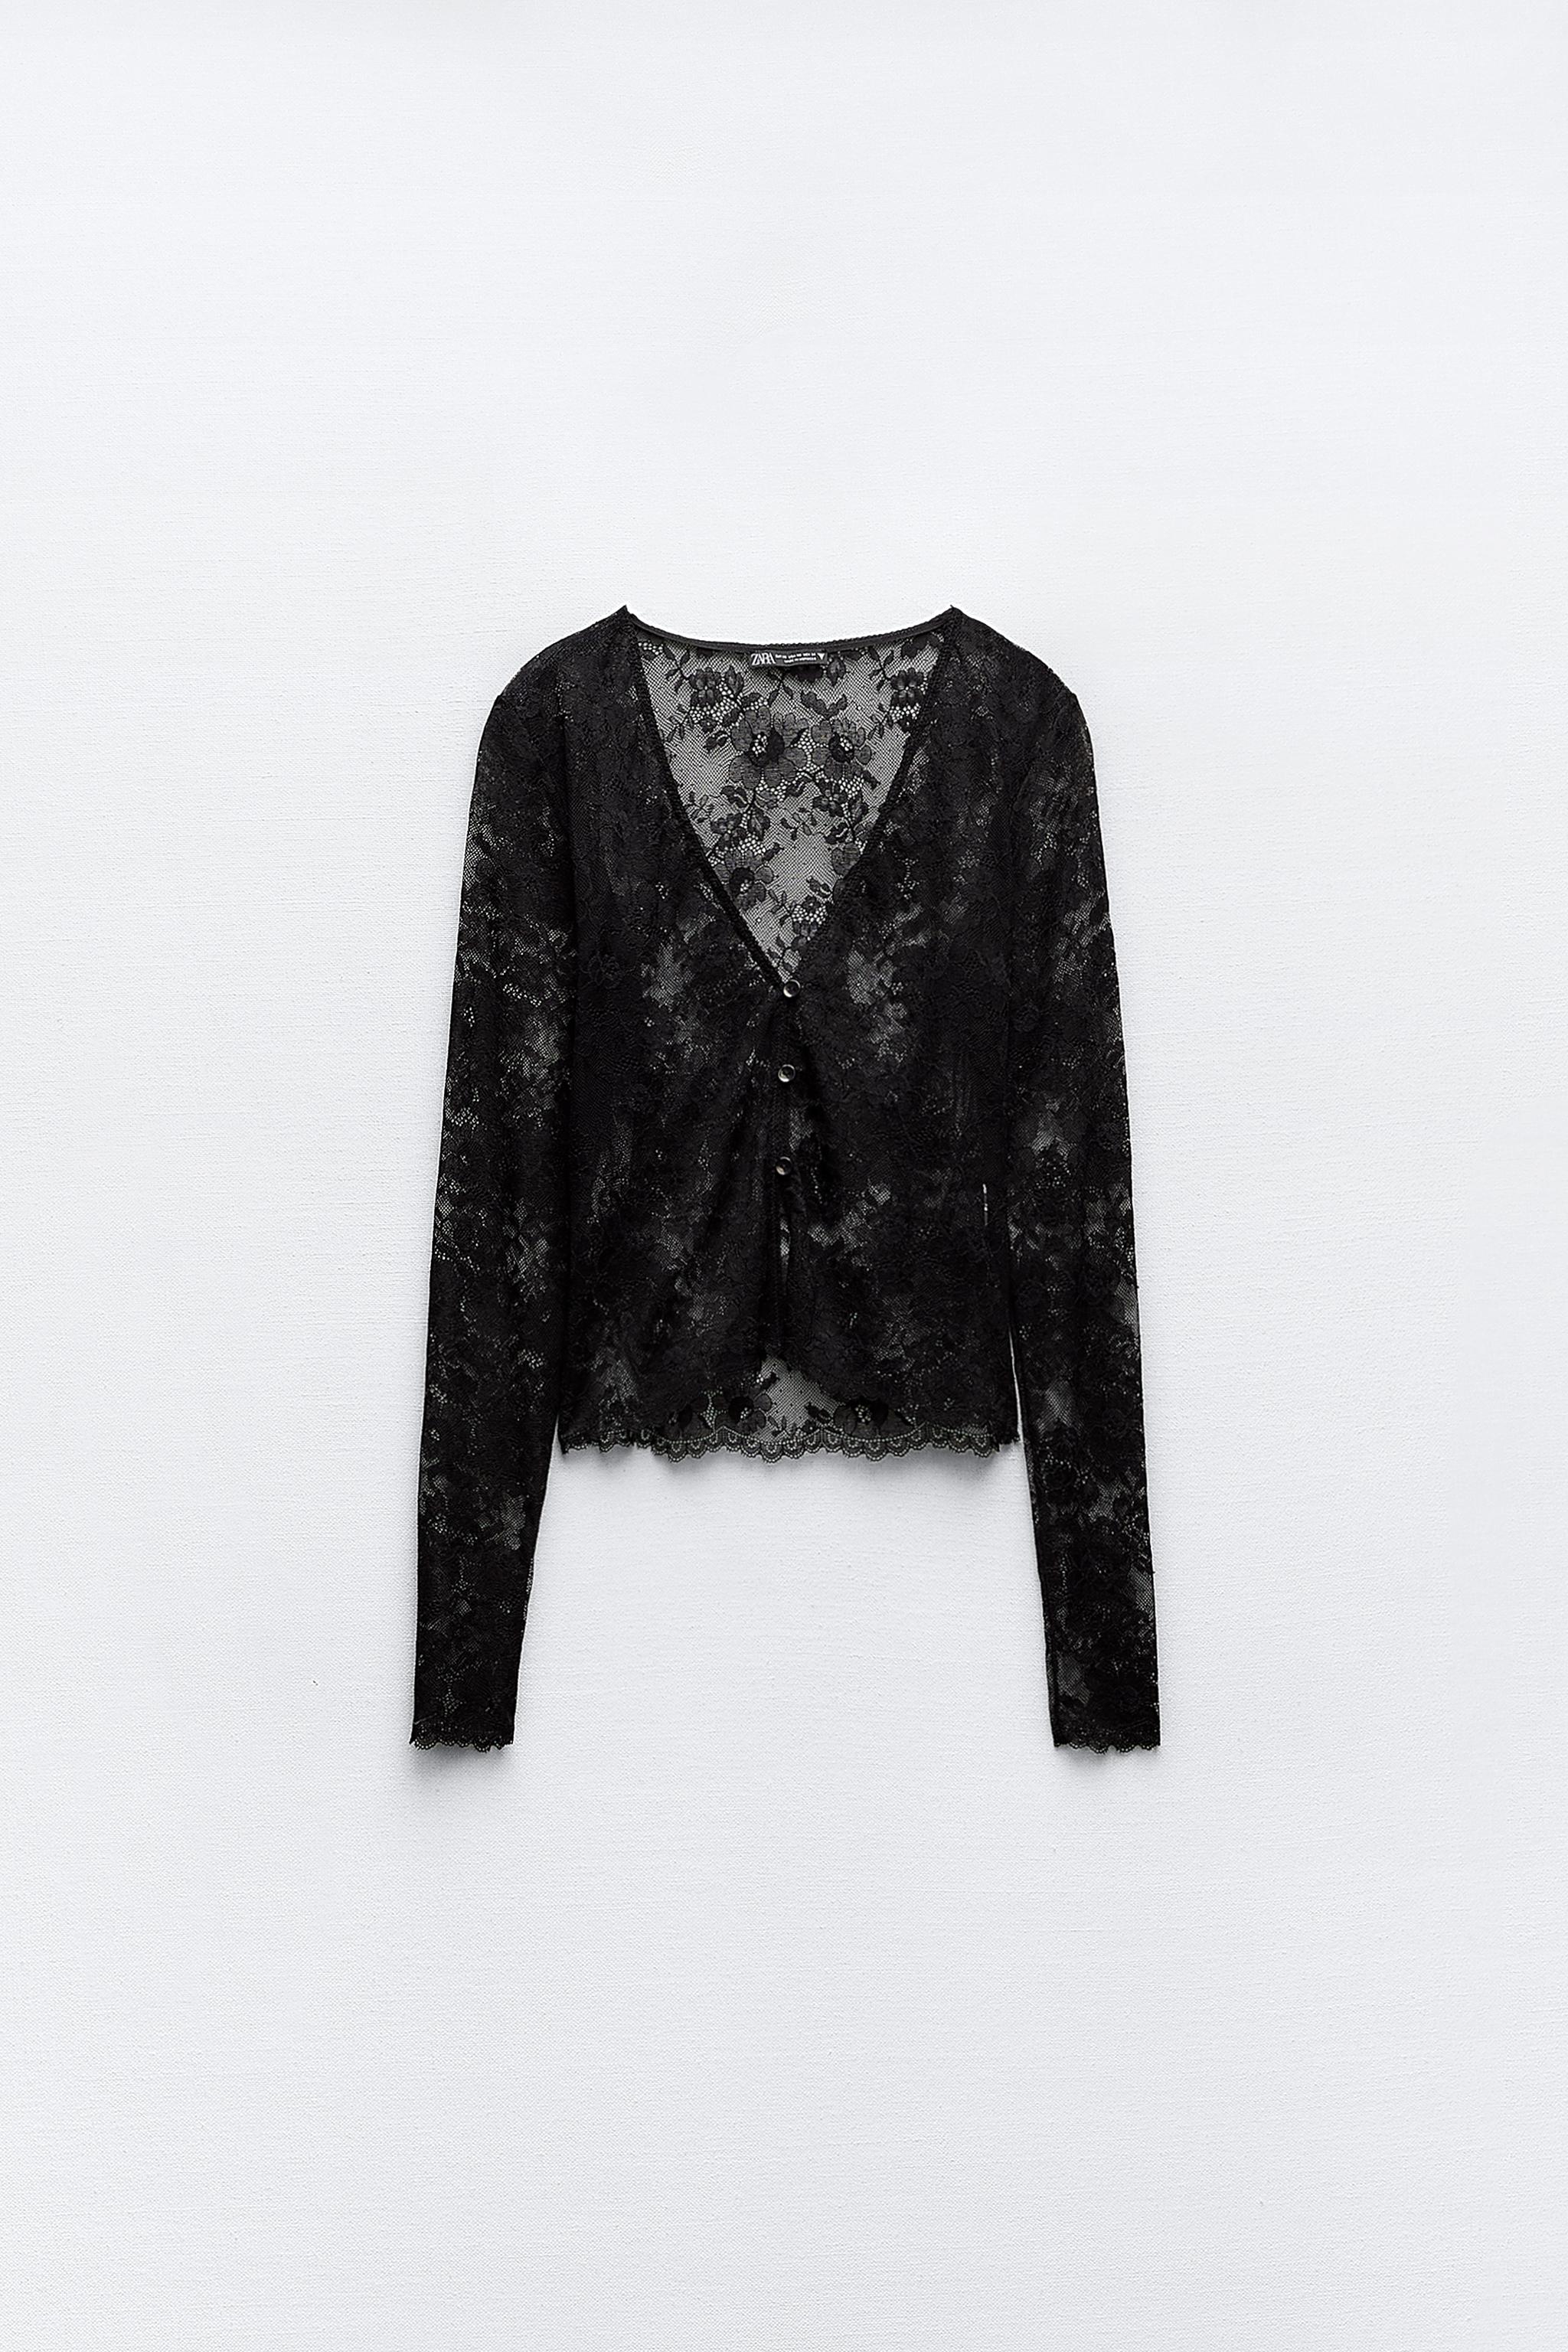  Black Lace Long Sleeve Top